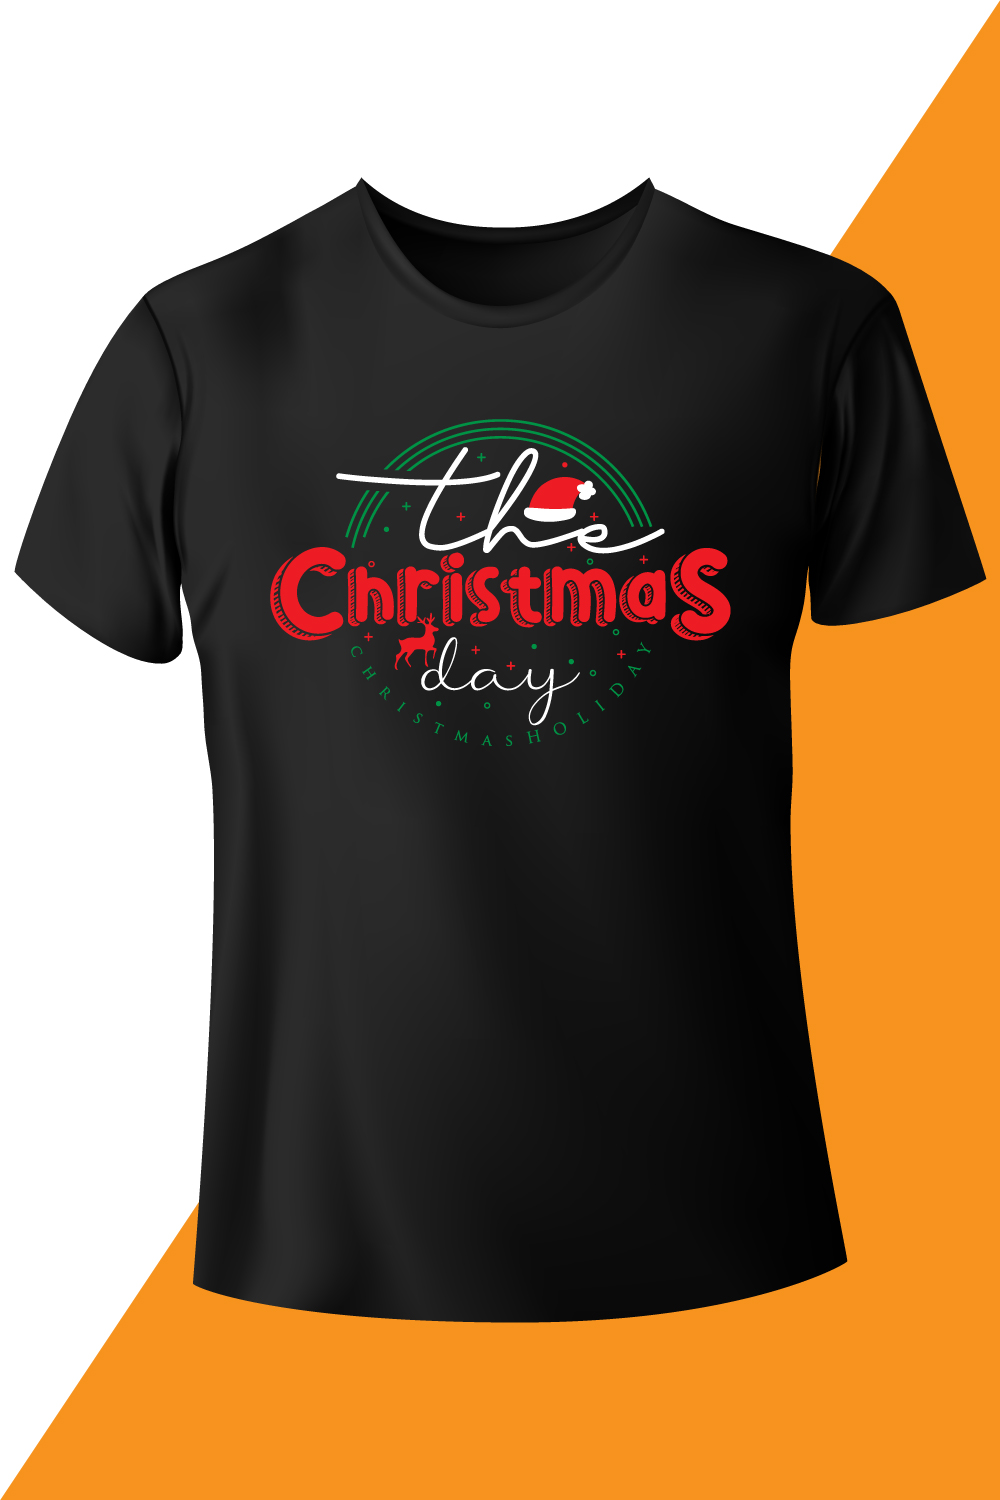 Image of a black t-shirt with a charming inscription The Christmas Day.